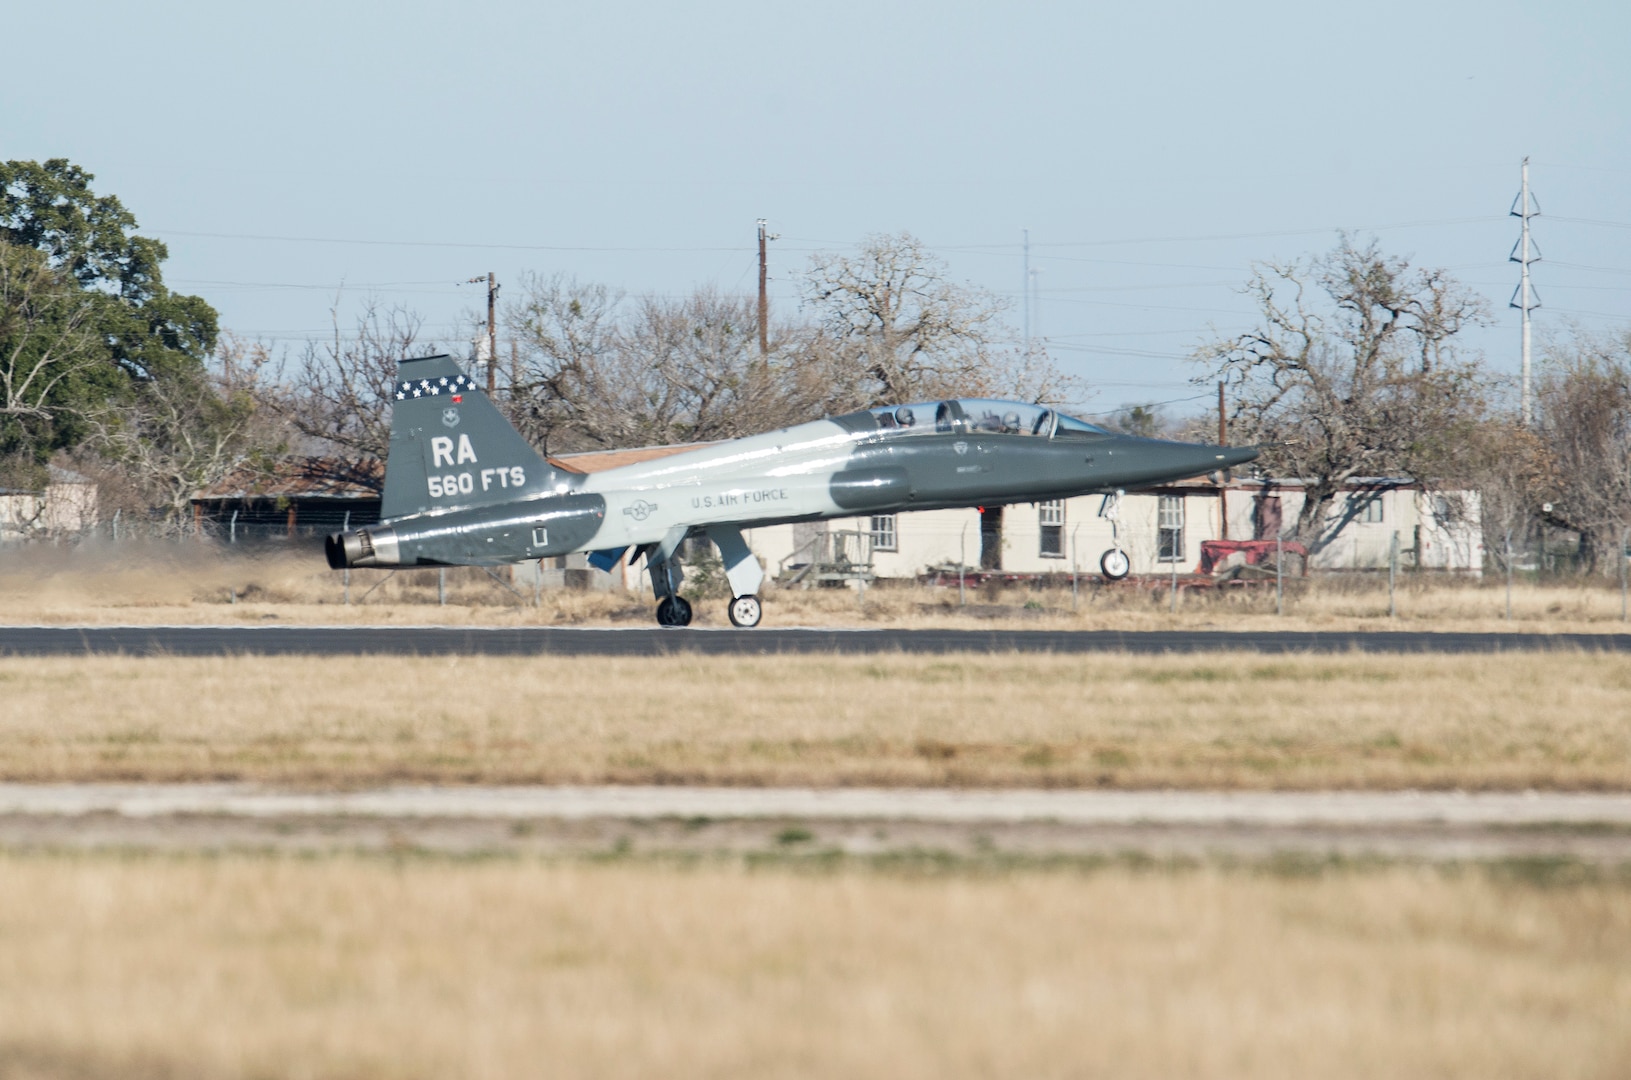 The first T-38C Talon lands at the Joint Base San Antonio-Randolph Seguin Auxiliary Airfield during a ribbon cutting event signifying the reopening of the JBSA-Randolph Seguin Auxiliary Airfield Jan. 20.  Upon completion of a three-year construction project, the airfield is now ready for flying by members of the 560th Flying Training Squadron.  The airfield is crucial for “touch and go” training that qualifies fighter and bomber pilots as instructor pilots in the T-38C Talon.  The reconstructed runway increases flight safety by distributing training around the San Antonio area, which means fewer aircraft and less congestion around Joint Base San Antonio-Randolph. (U.S. Air Force photo by Johnny Saldivar)